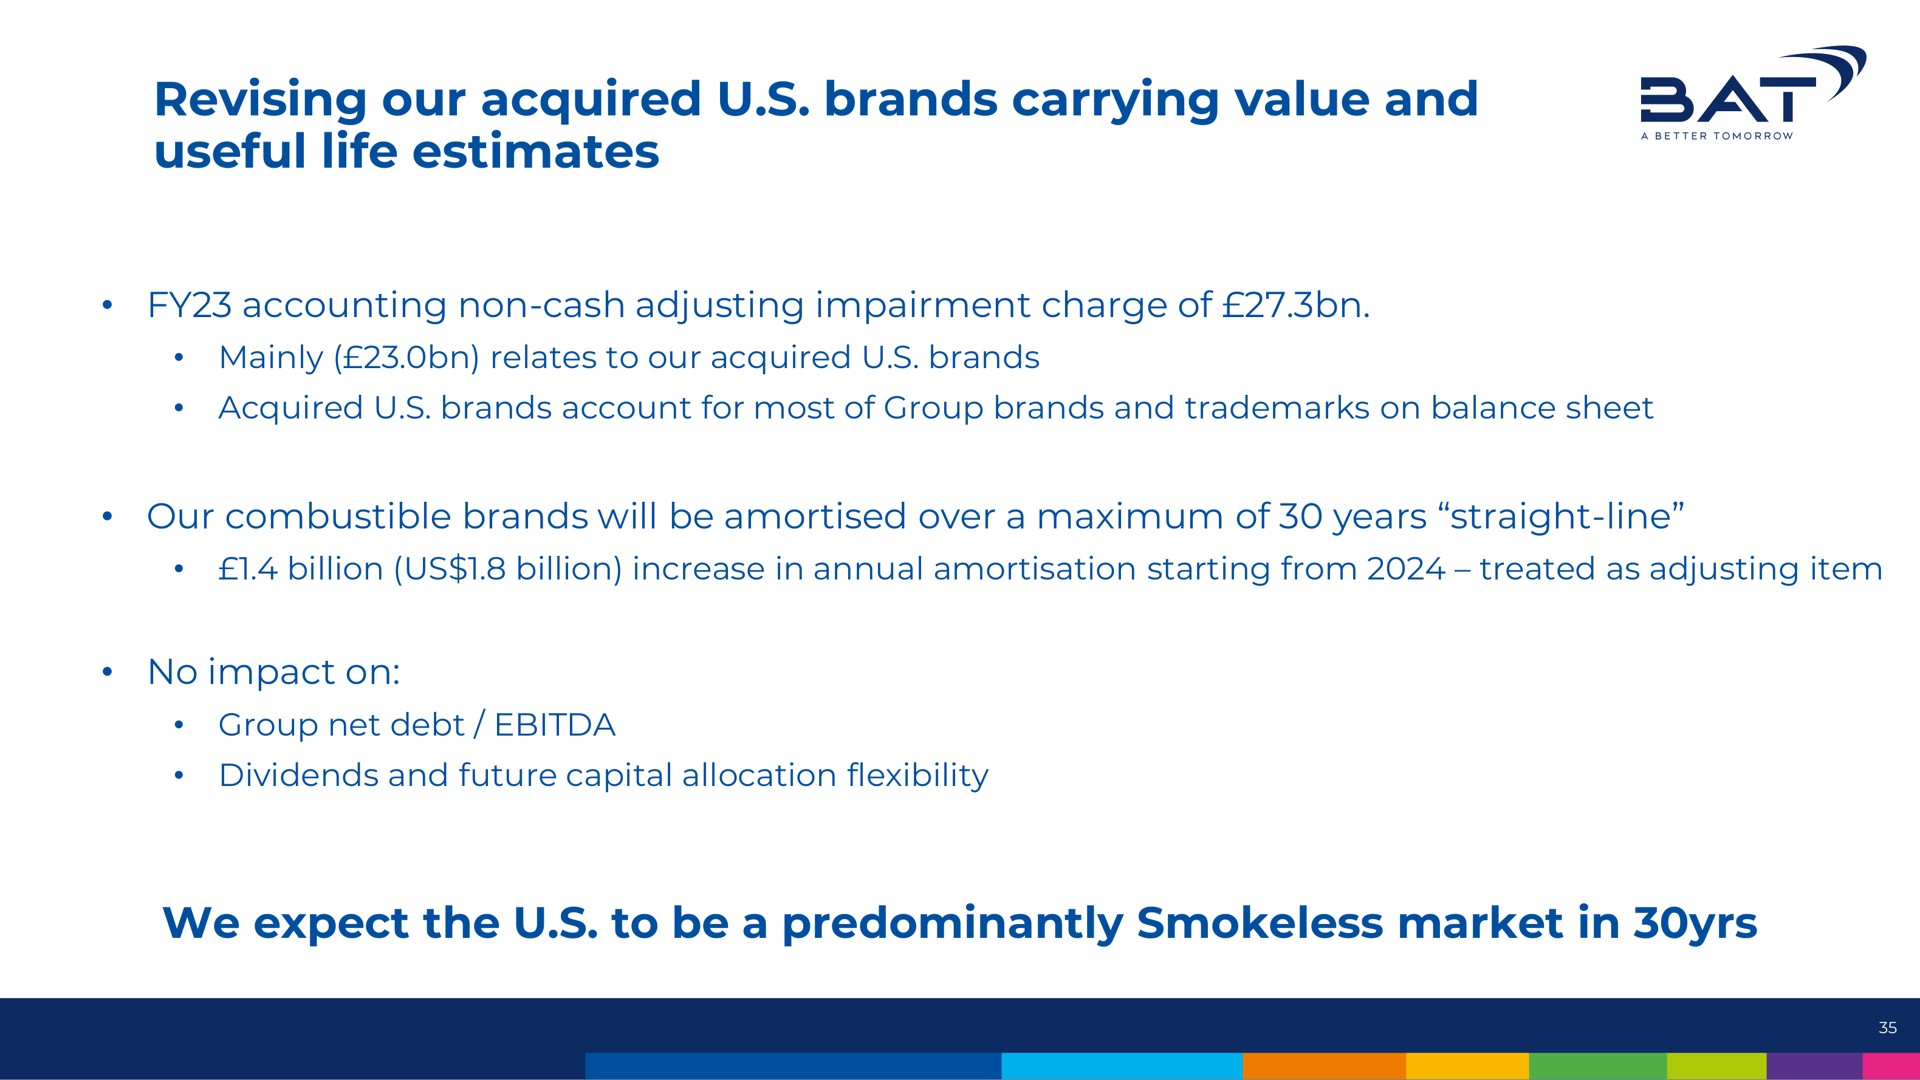 revising our acquired brands carrying value and useful life estimates at we expect the to be a predominantly smokeless market in yrs | BAT